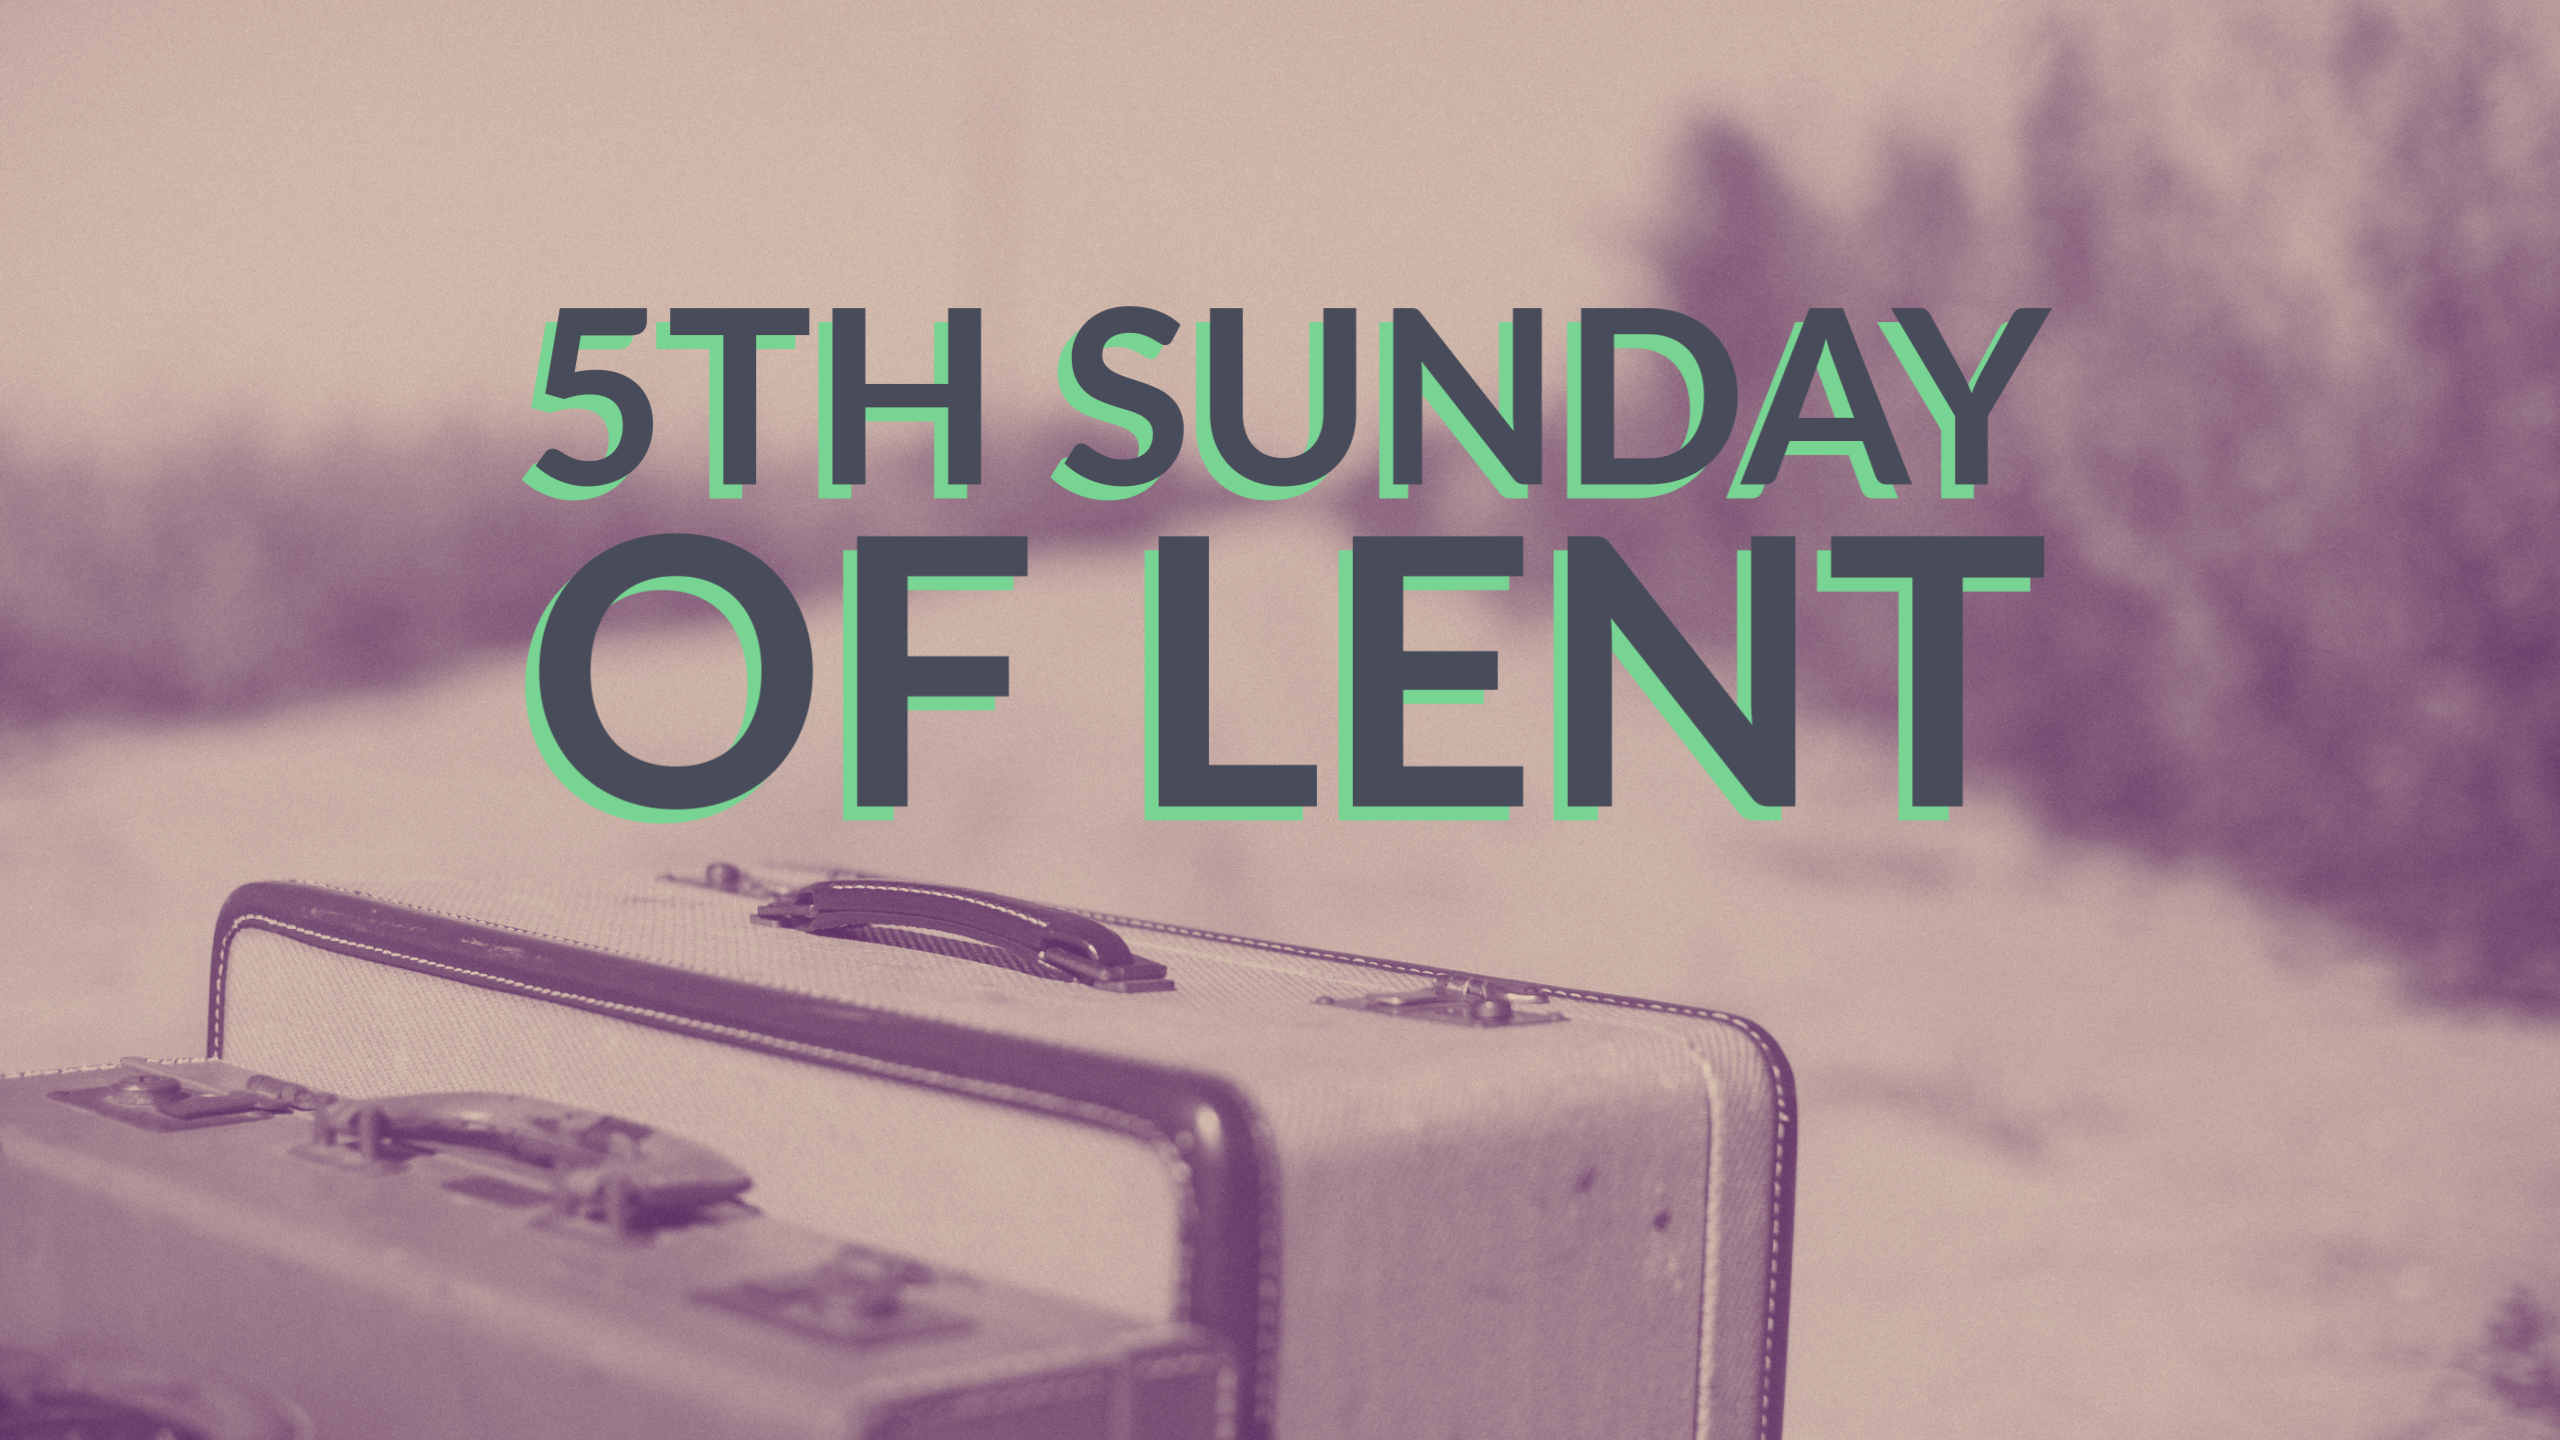 Fifth Sunday of Lent